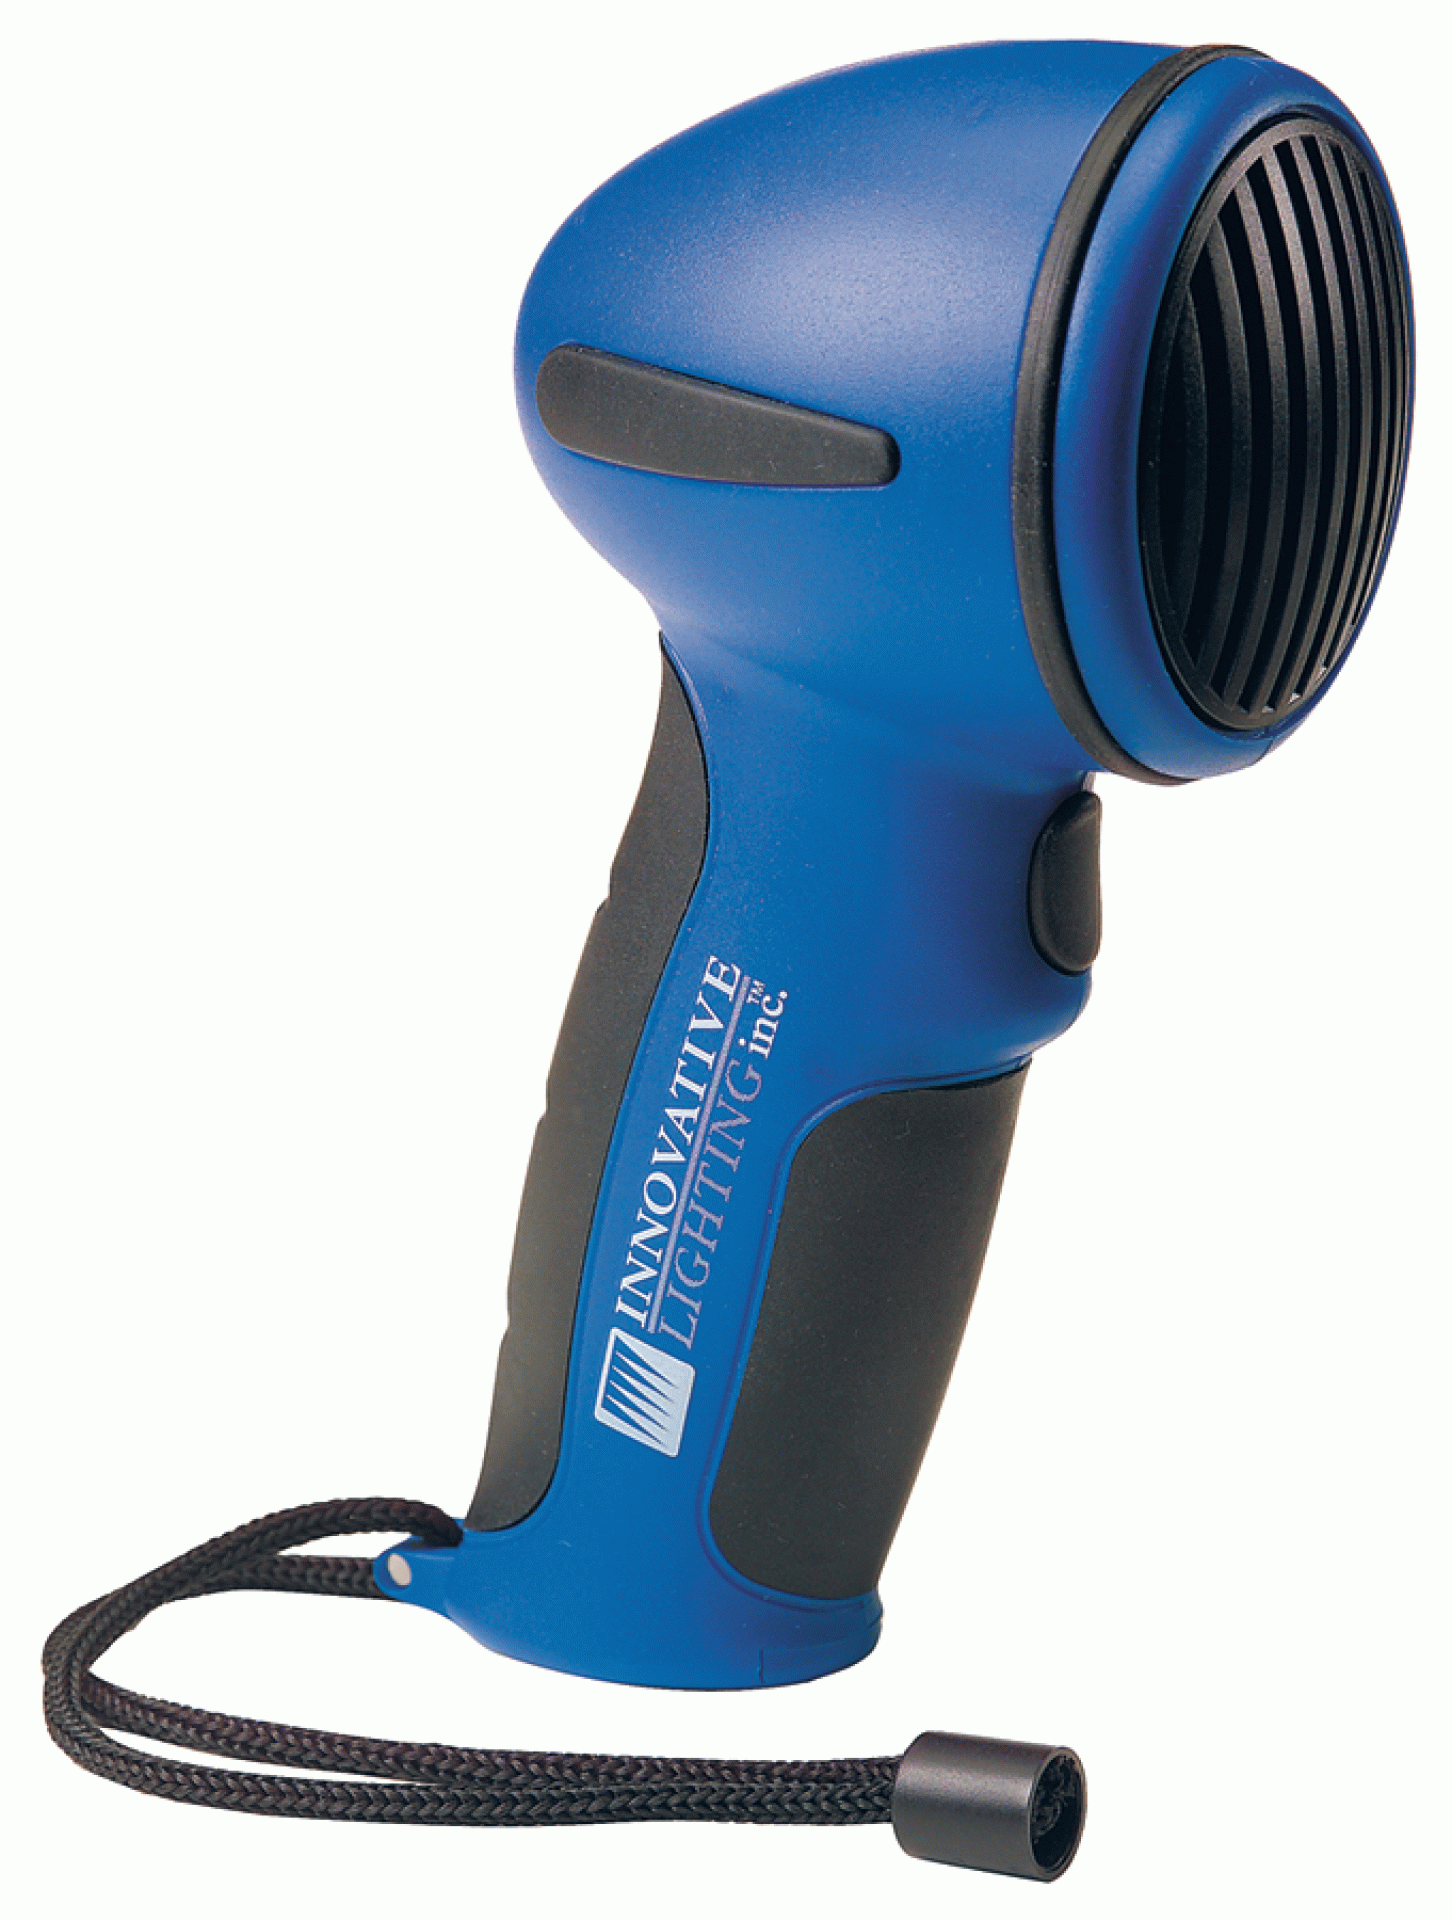 INNOVATIVE LIGHTING INC. | 545-5010-7 | HORN PORTABLE HANDHELD ELECTRONIC SIGNALING WITH CRADLE BLUE